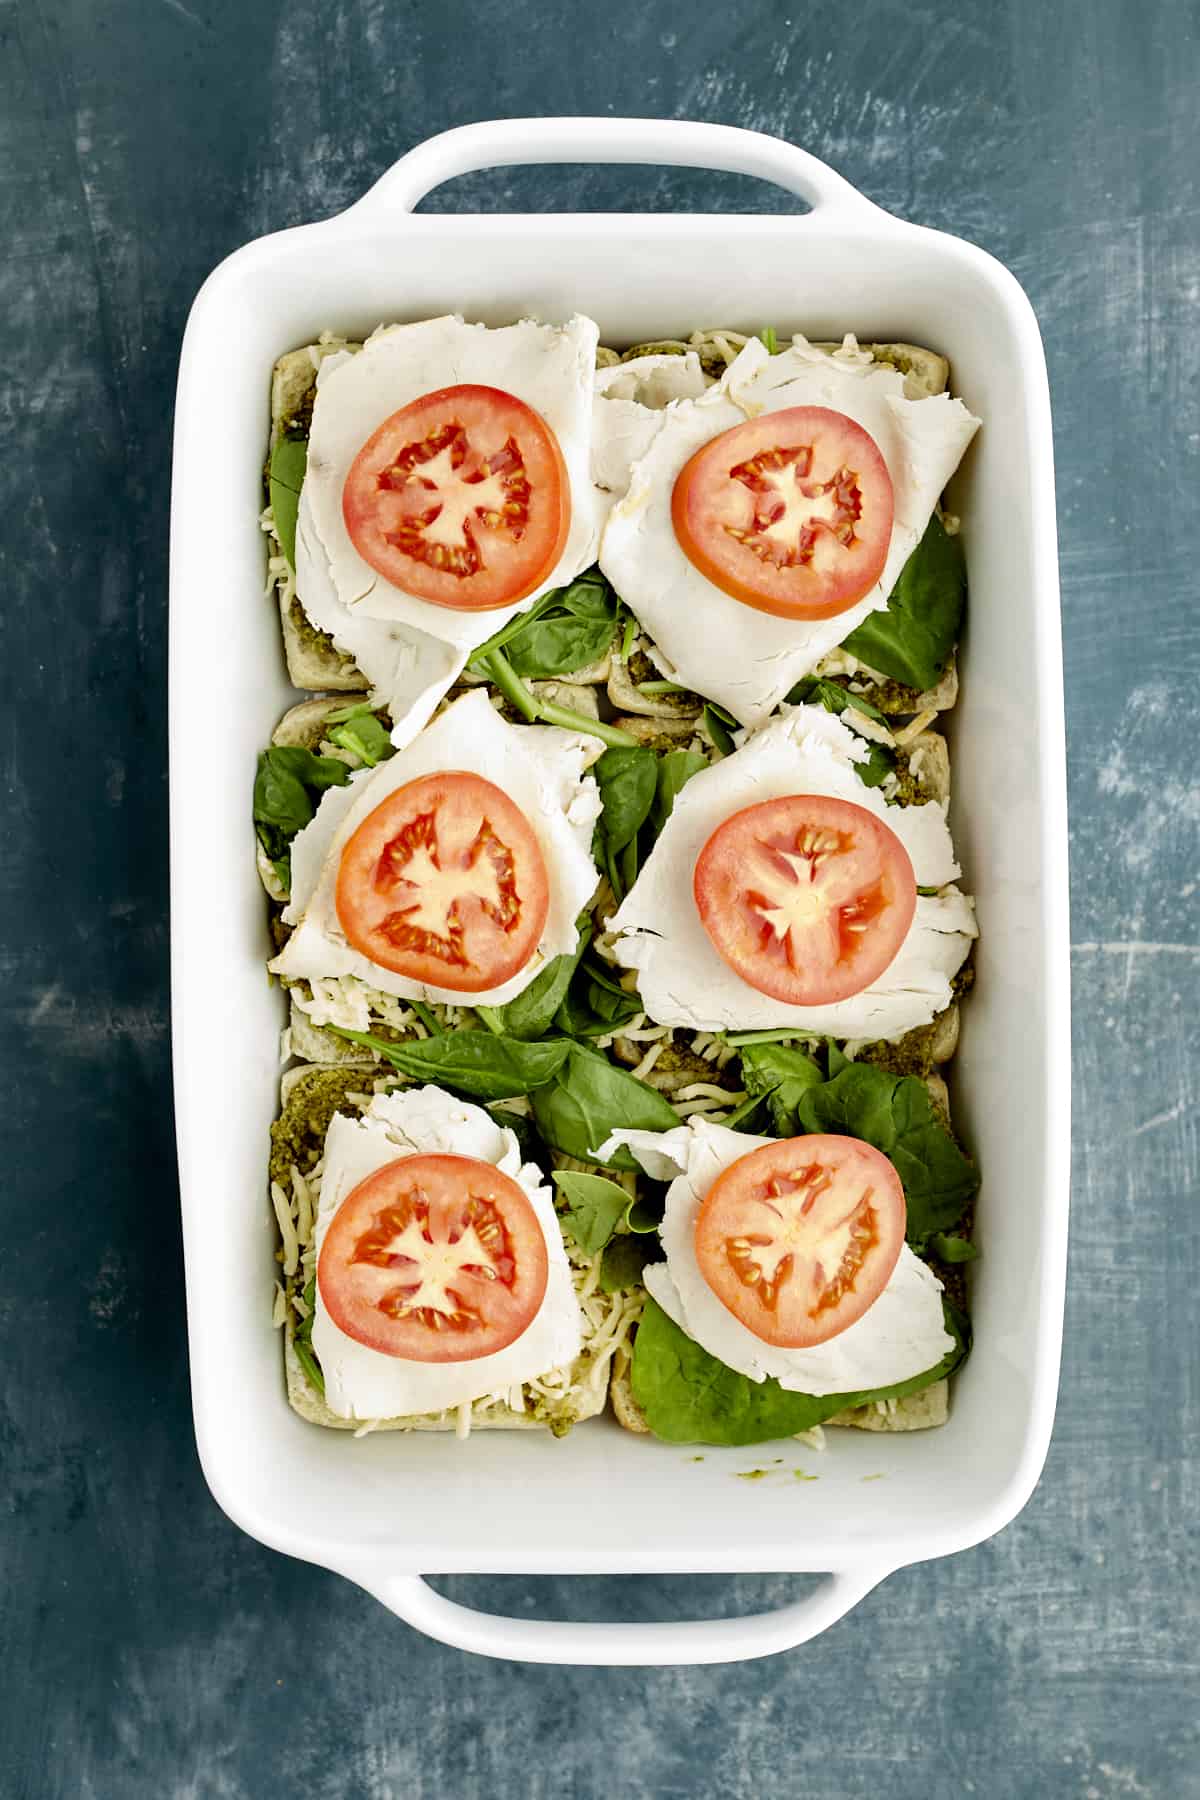 Sliced ciabatta buns in a white baking dish layered with pesto, spinach, turkey, and tomatoes.